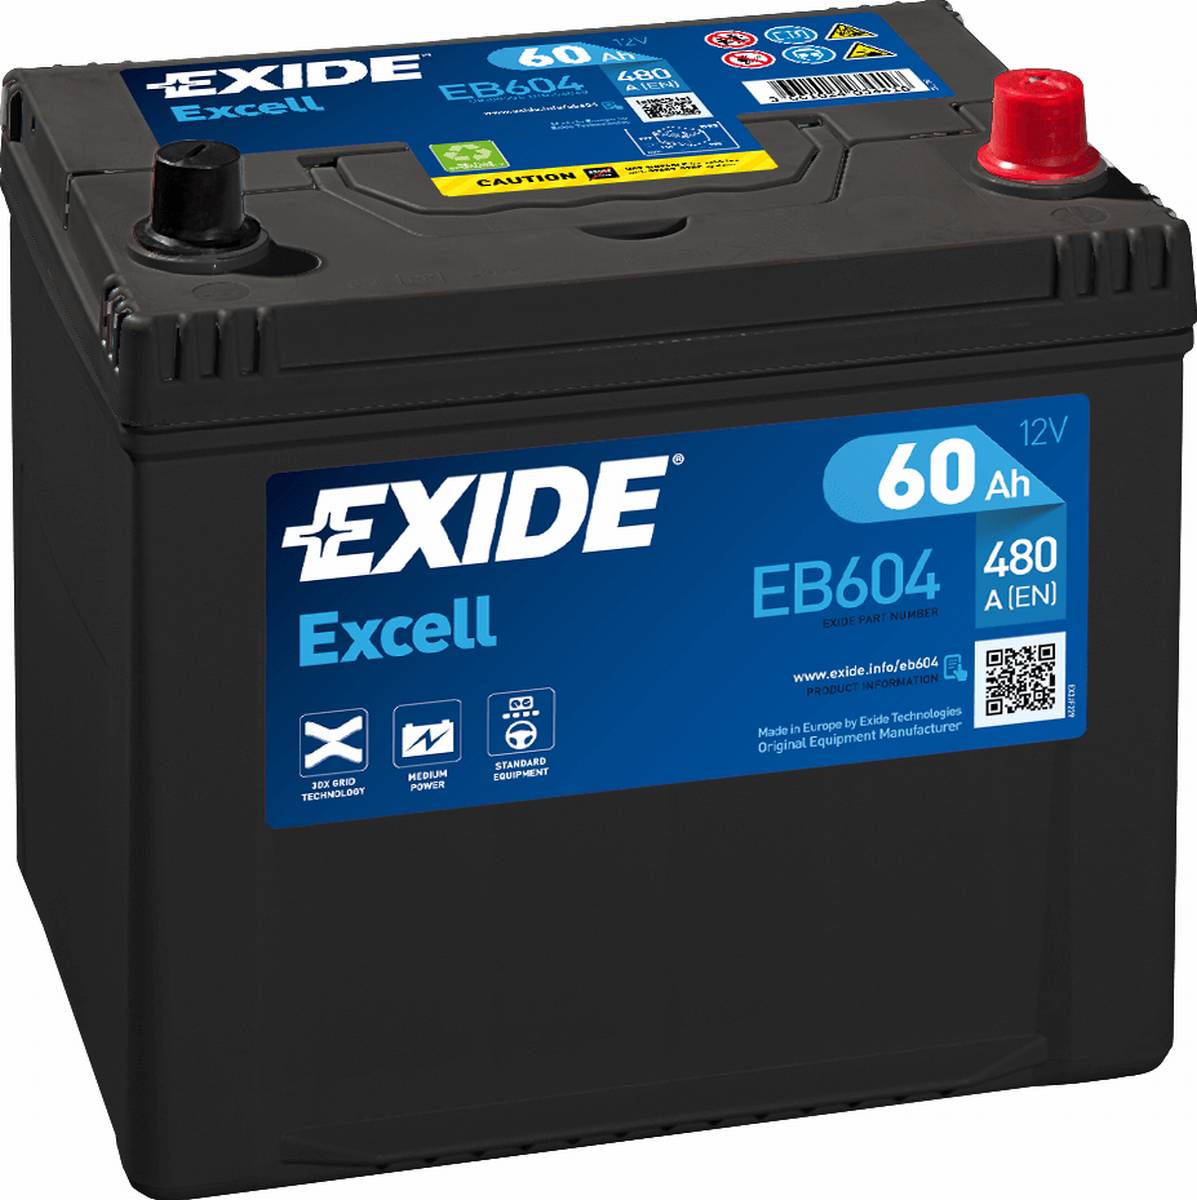 Exide EB620 Excell 12V 62 Ah 540A car battery, Starter batteries, Boots &  Marine, Batteries by application